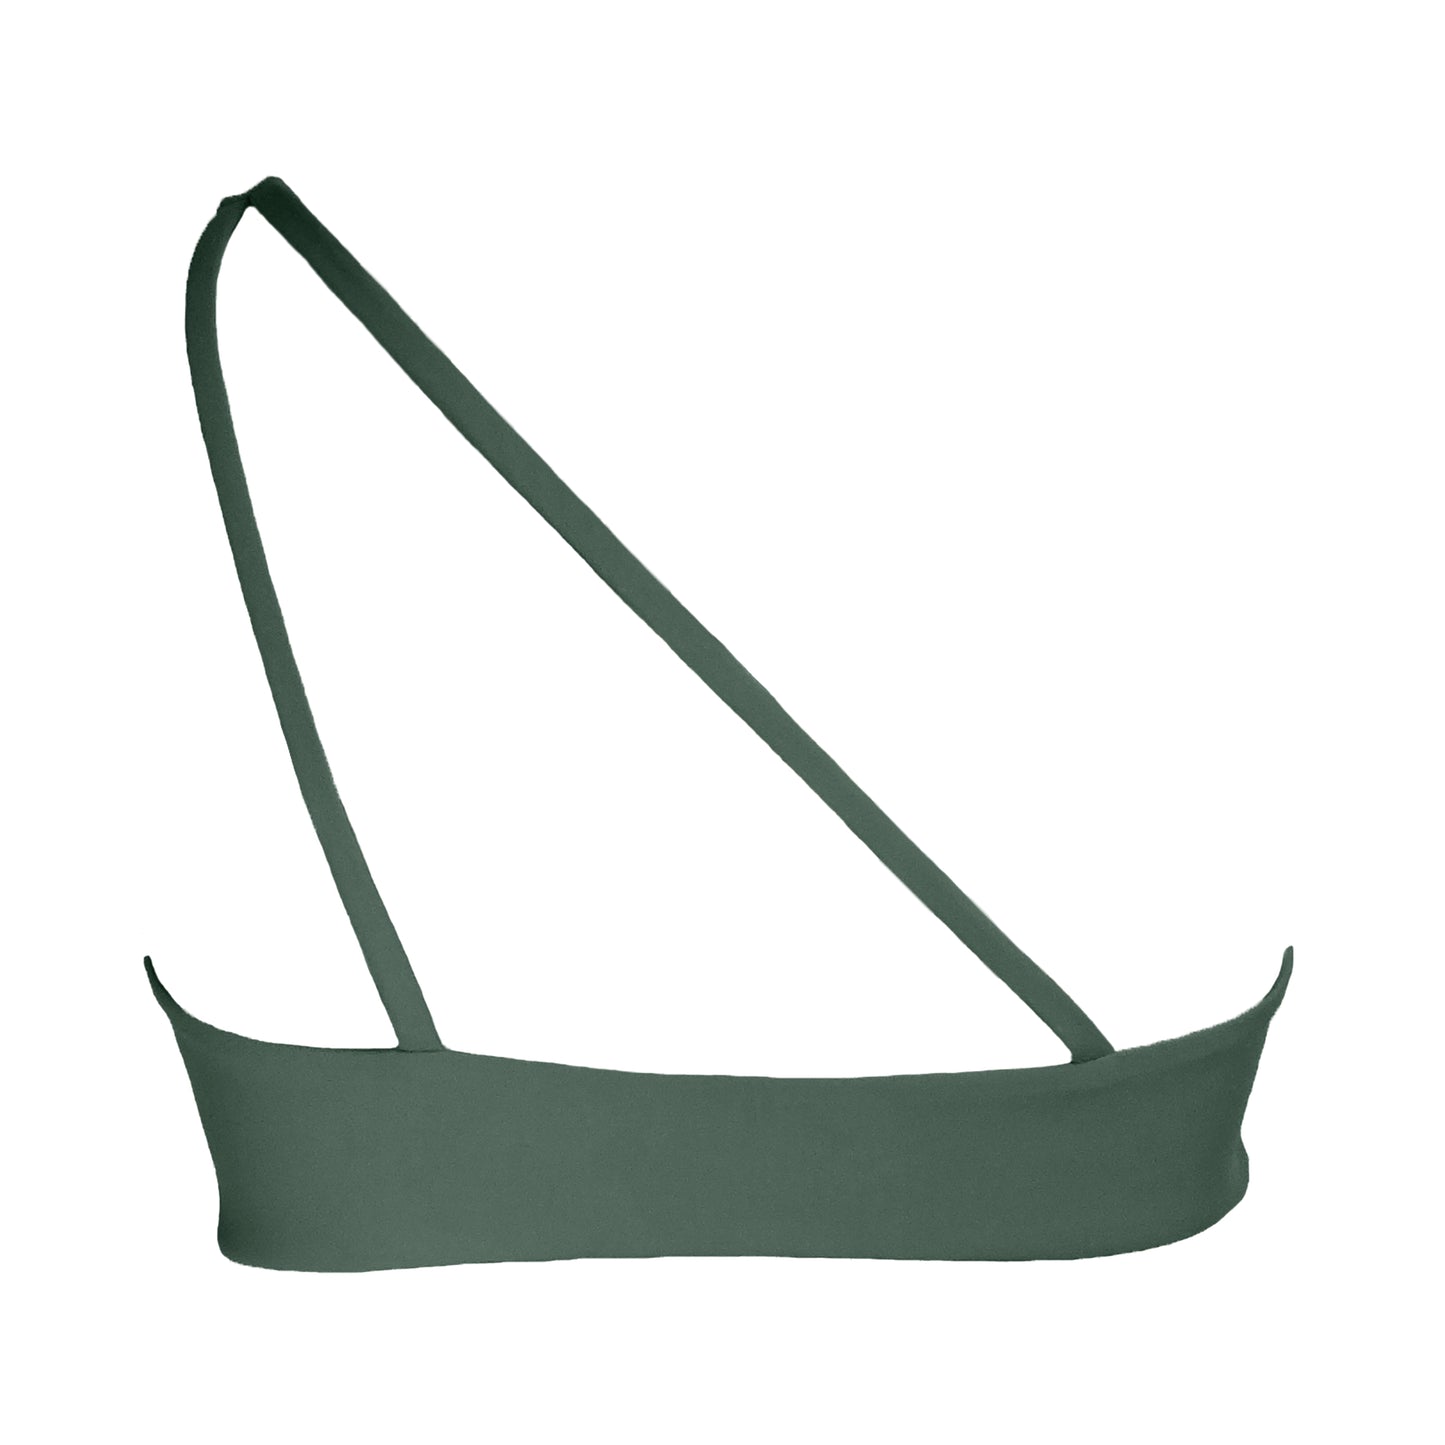 Bakc view of sage green Asymmetric bikini top with strapless top fit and double back strap detail.